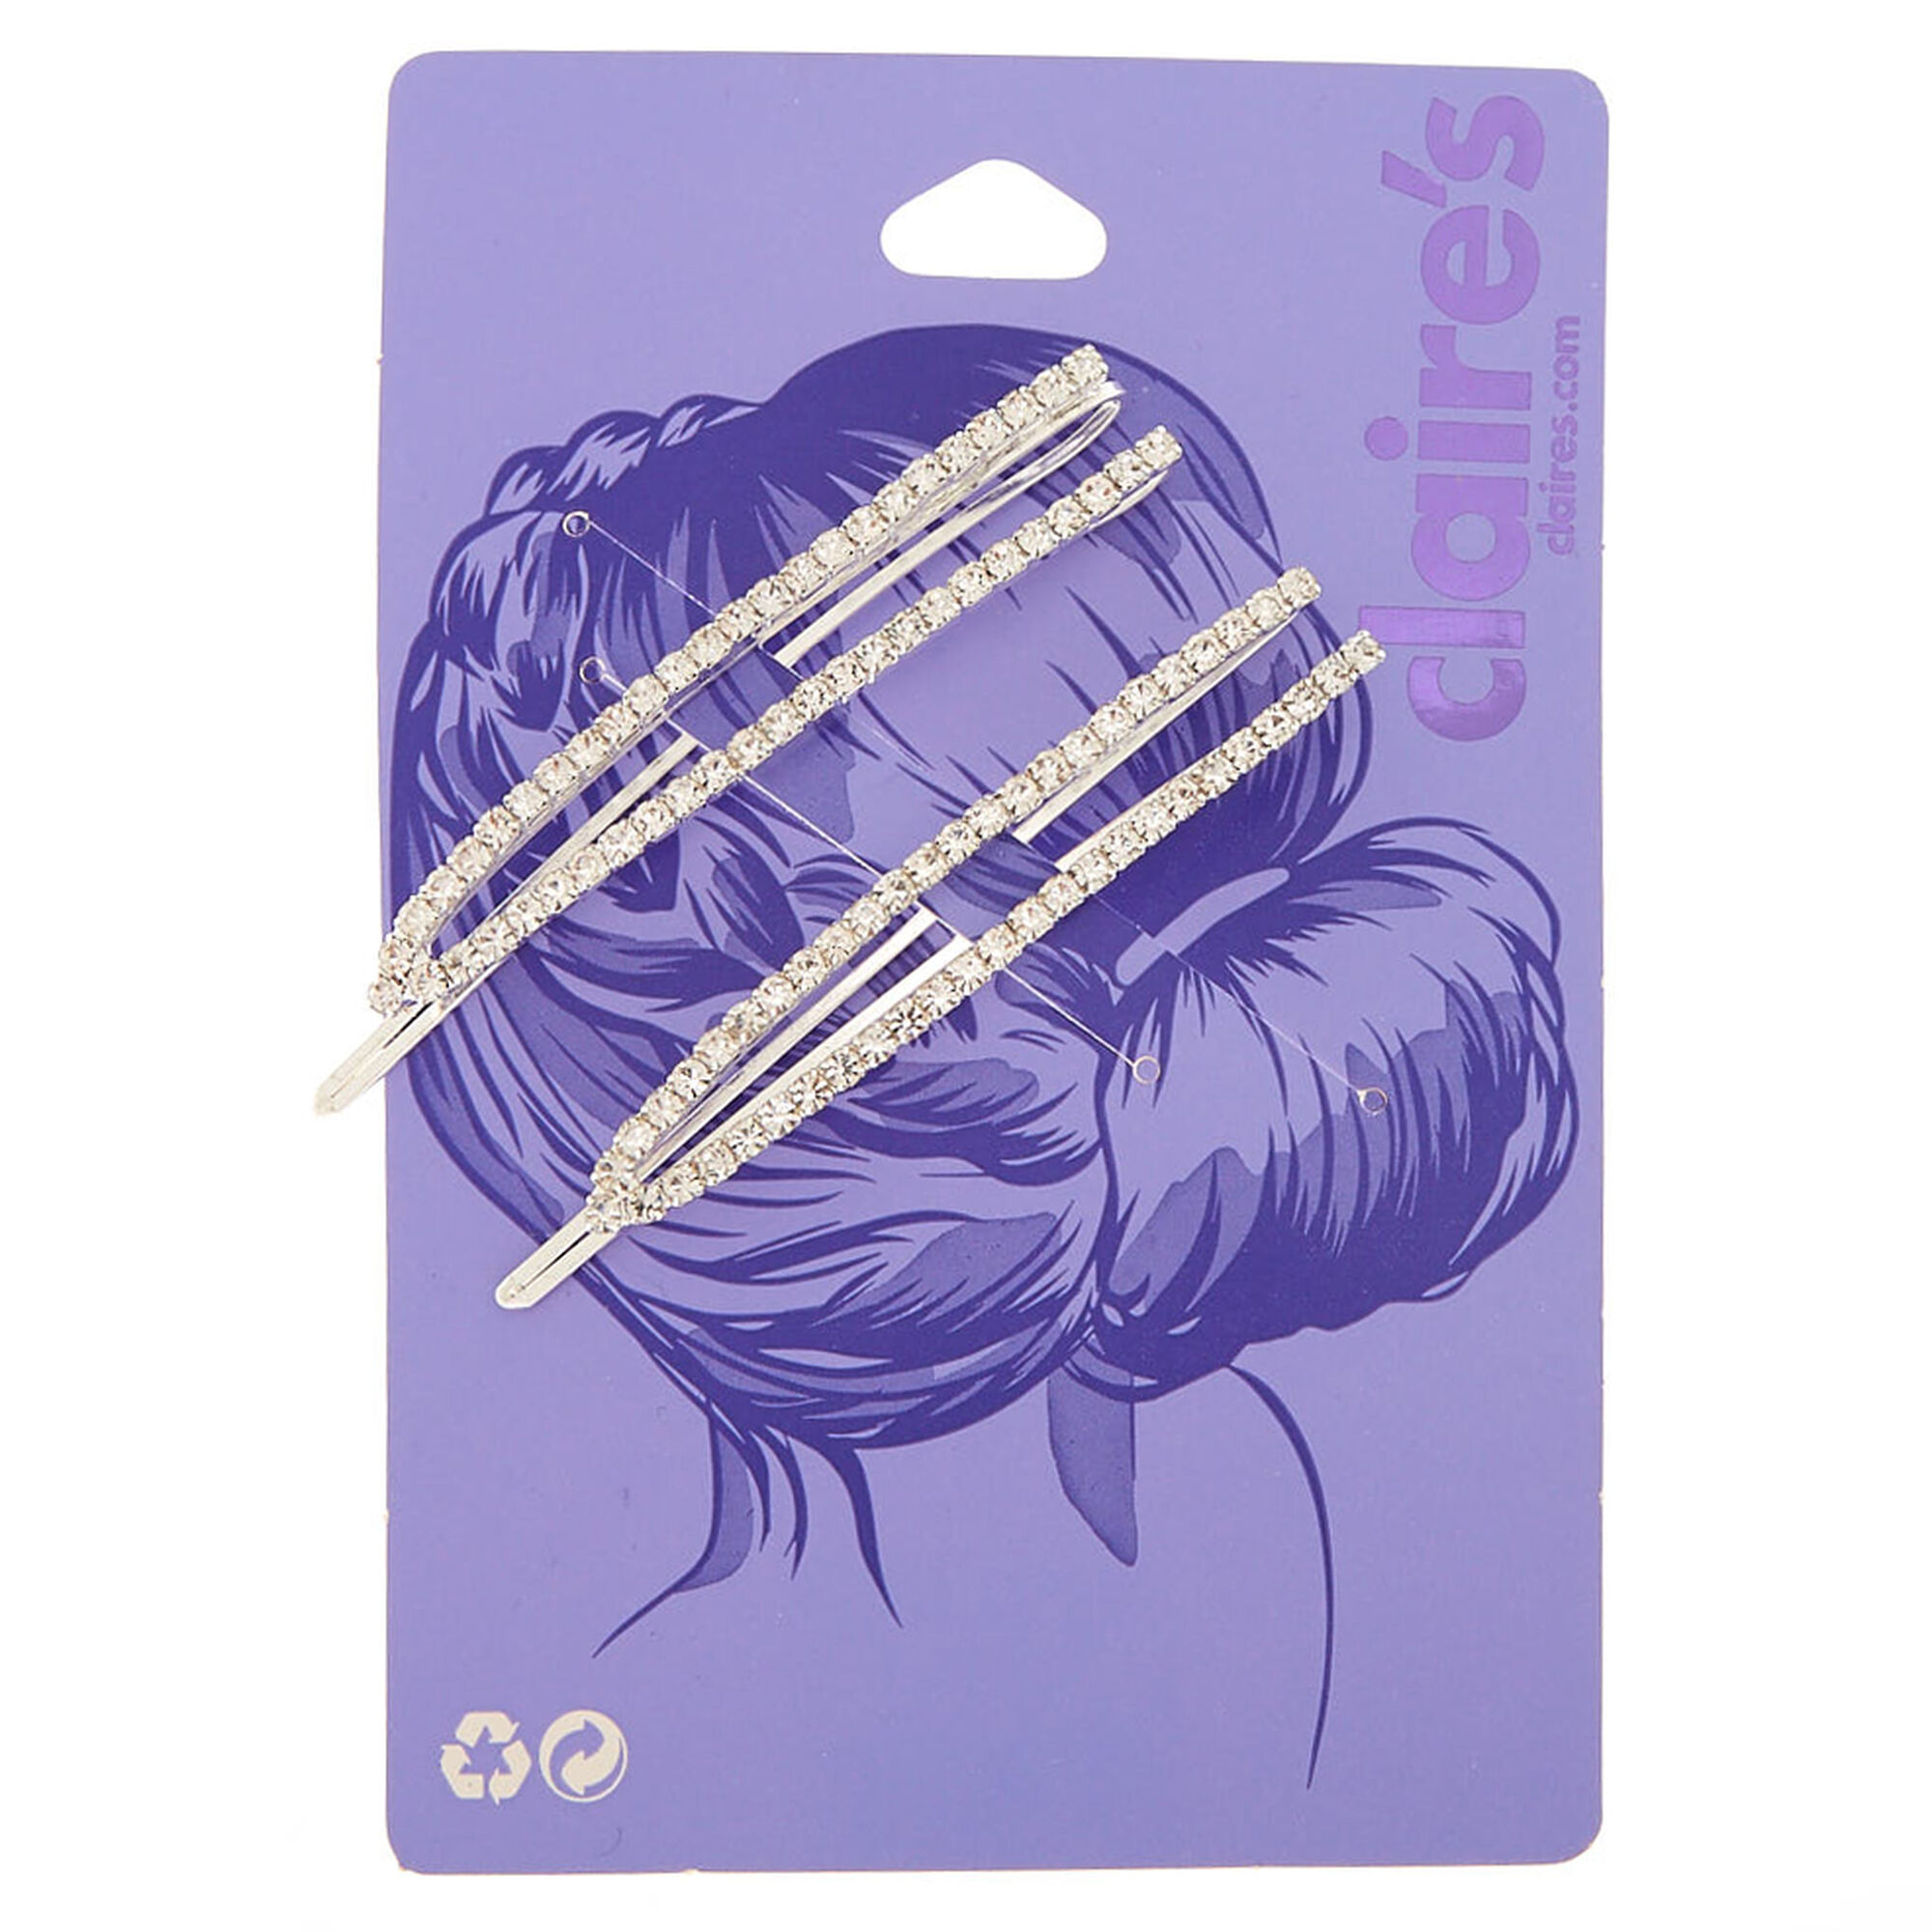 View Claires Tone Rhinestone Open Hair Pins 2 Pack Silver information